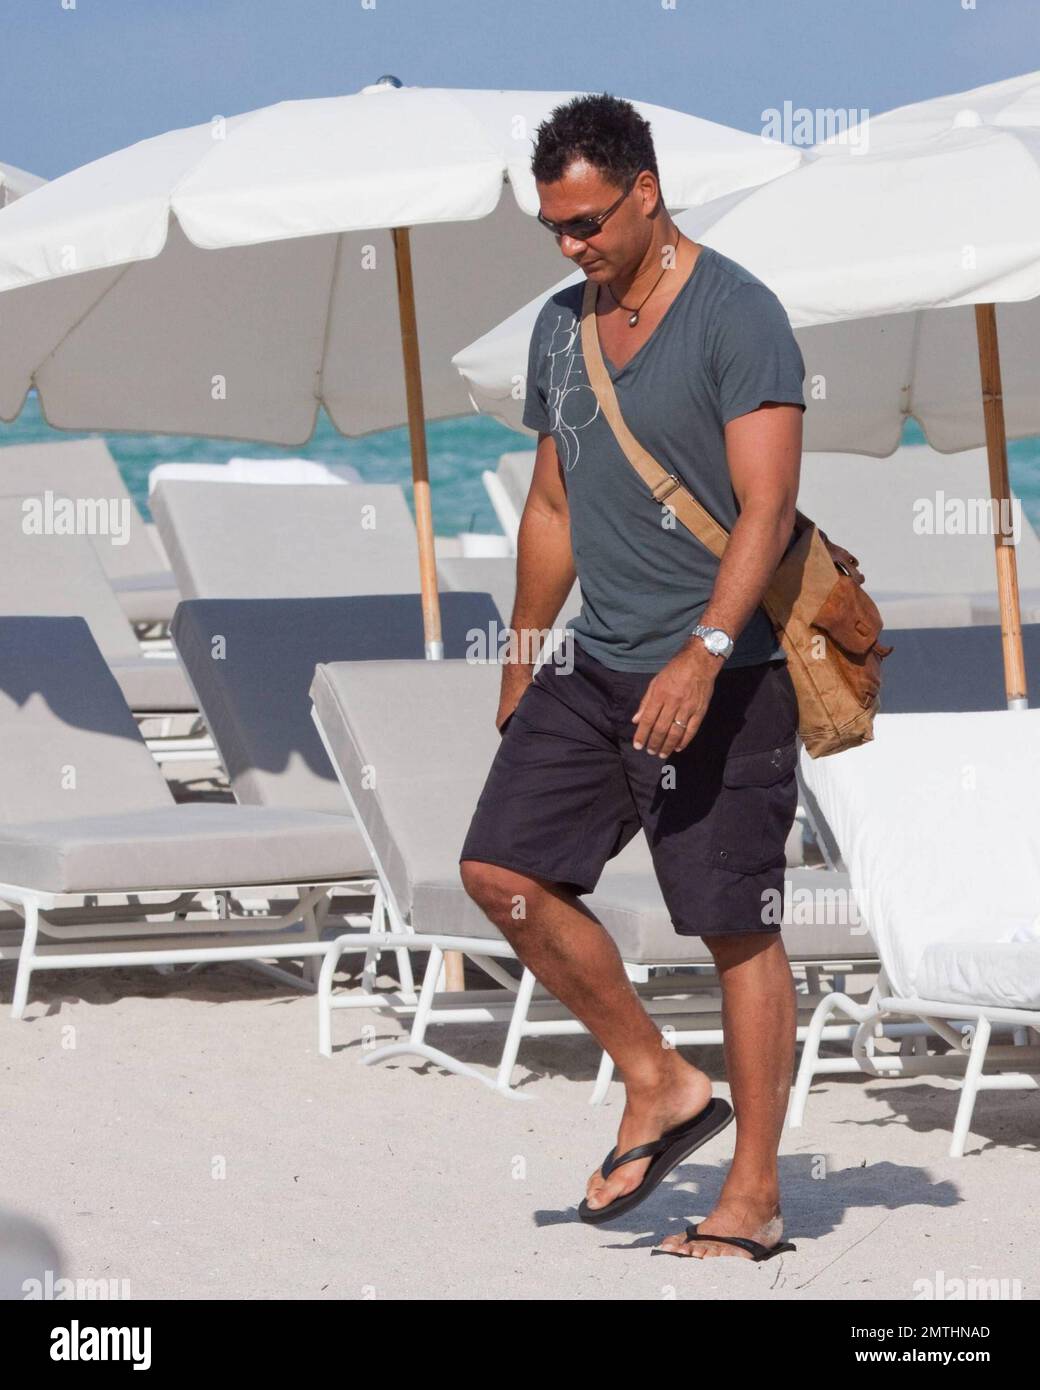 EXCLUSIVE!! Former footballer and soccer manager Ruud Gullit spends ...